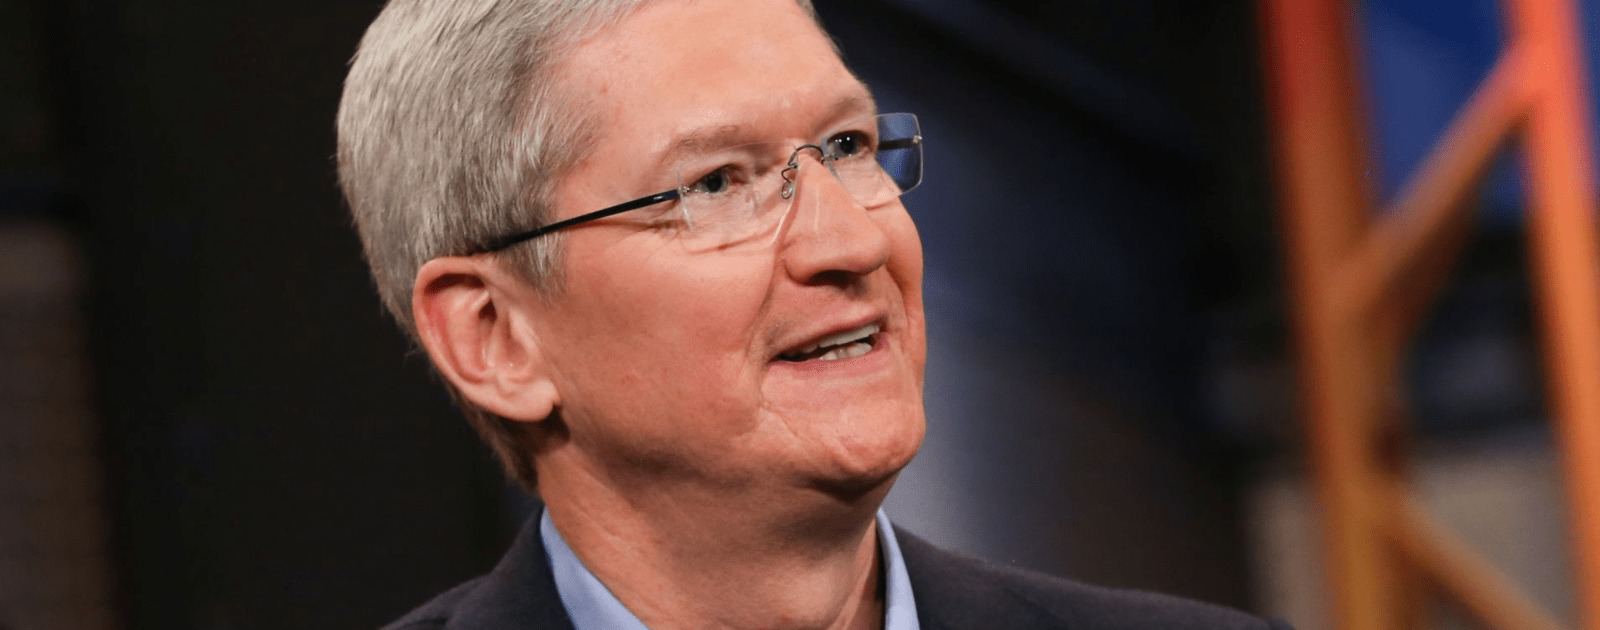 Tim Cook Makes Charitable Donation of $2 Million Worth of Apple Stock